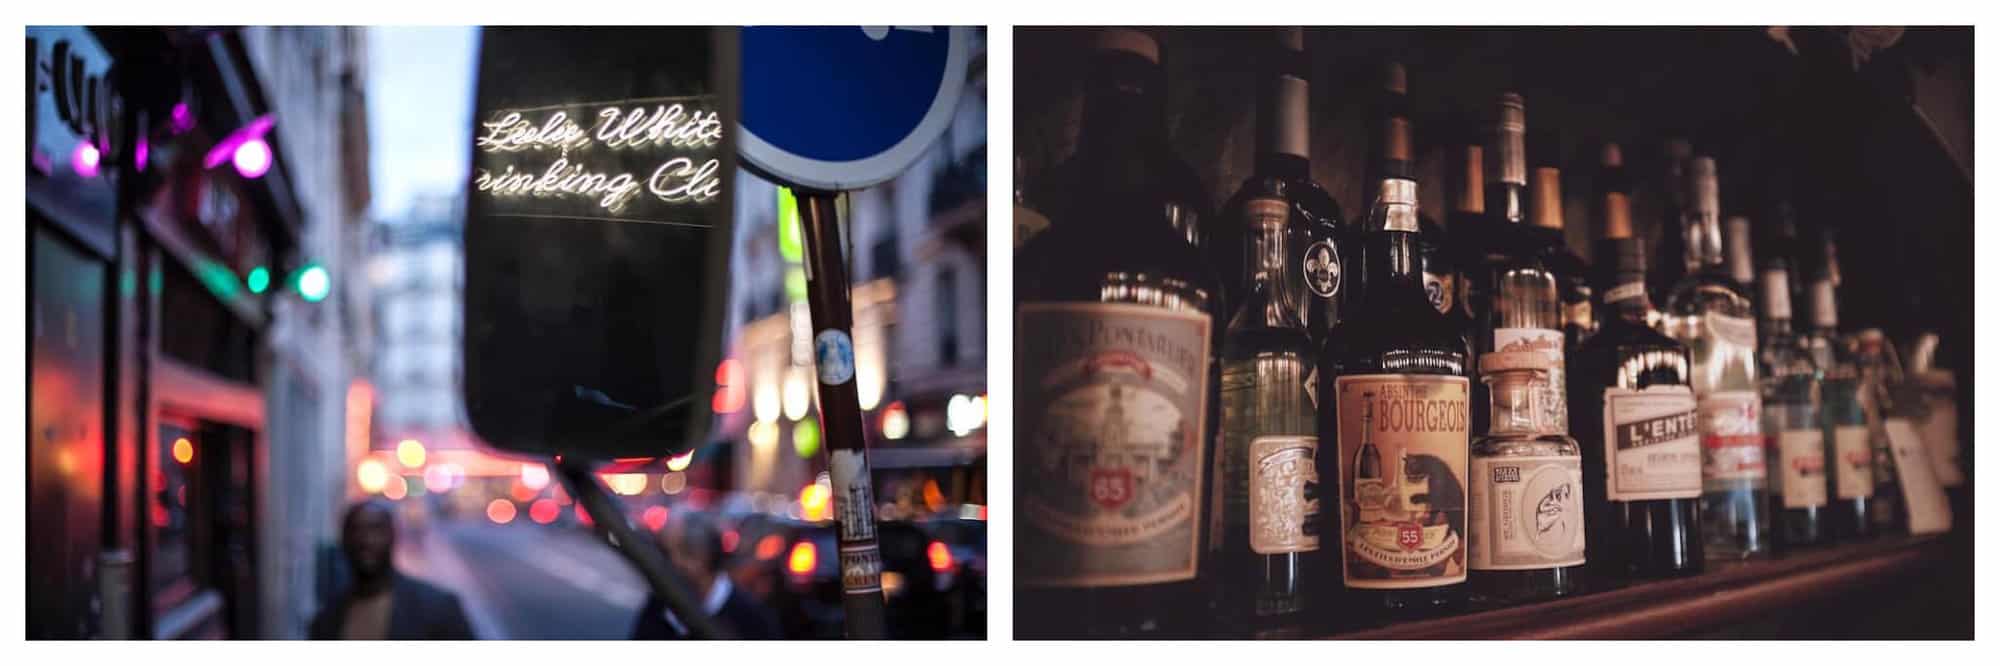 Left: a street in Paris. In the mirror of a motorcycle, the words "Lulu White Drinking Club" are visible. The surrounding street is out of focus and cars' break lights are visible. Right: a shelf filled with liquor bottles in a bar.